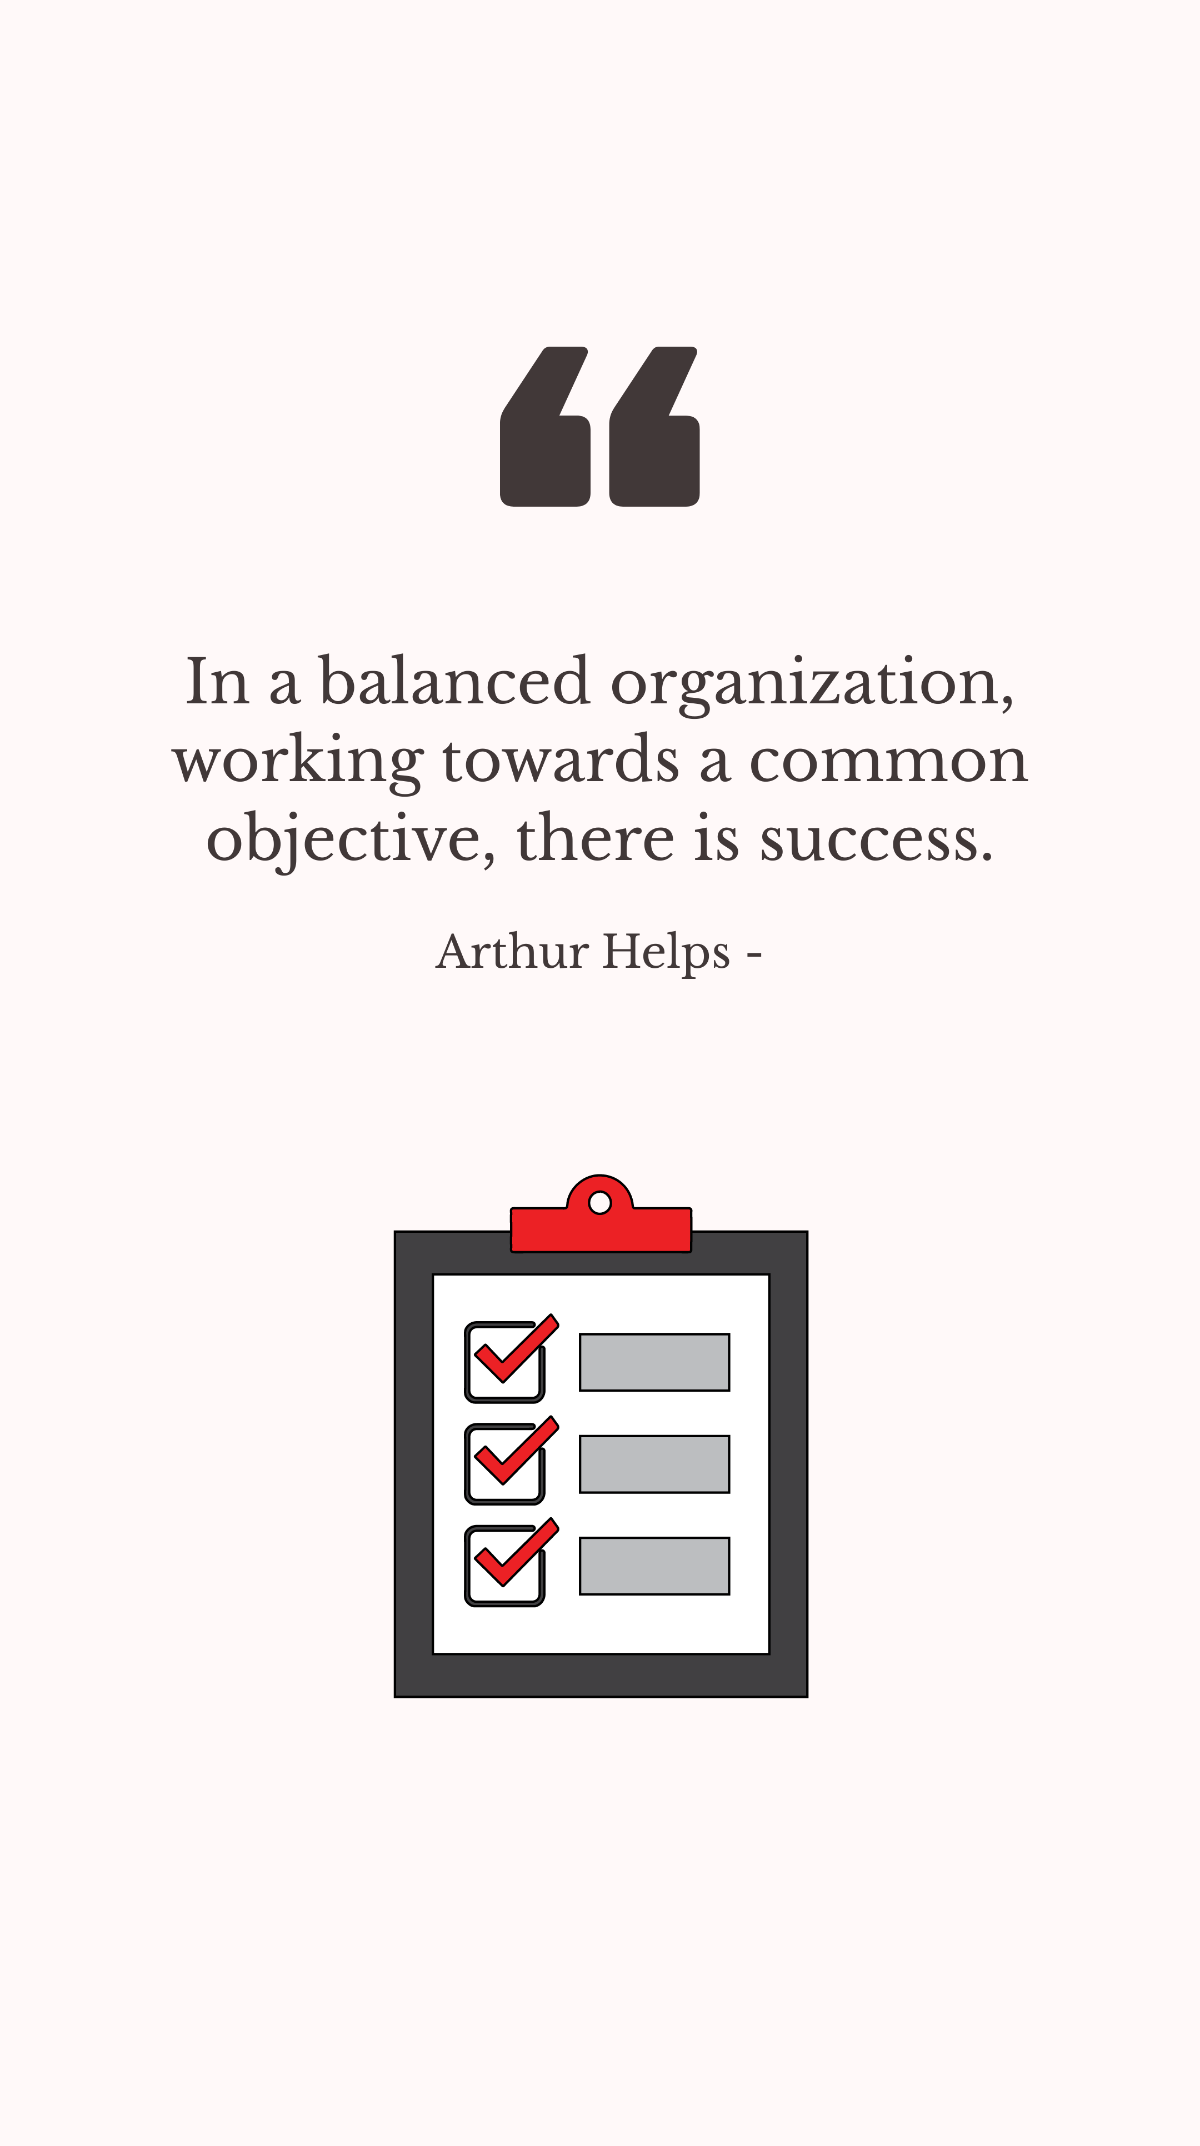 Arthur Helps - In a balanced organization, working towards a common objective, there is success. Template